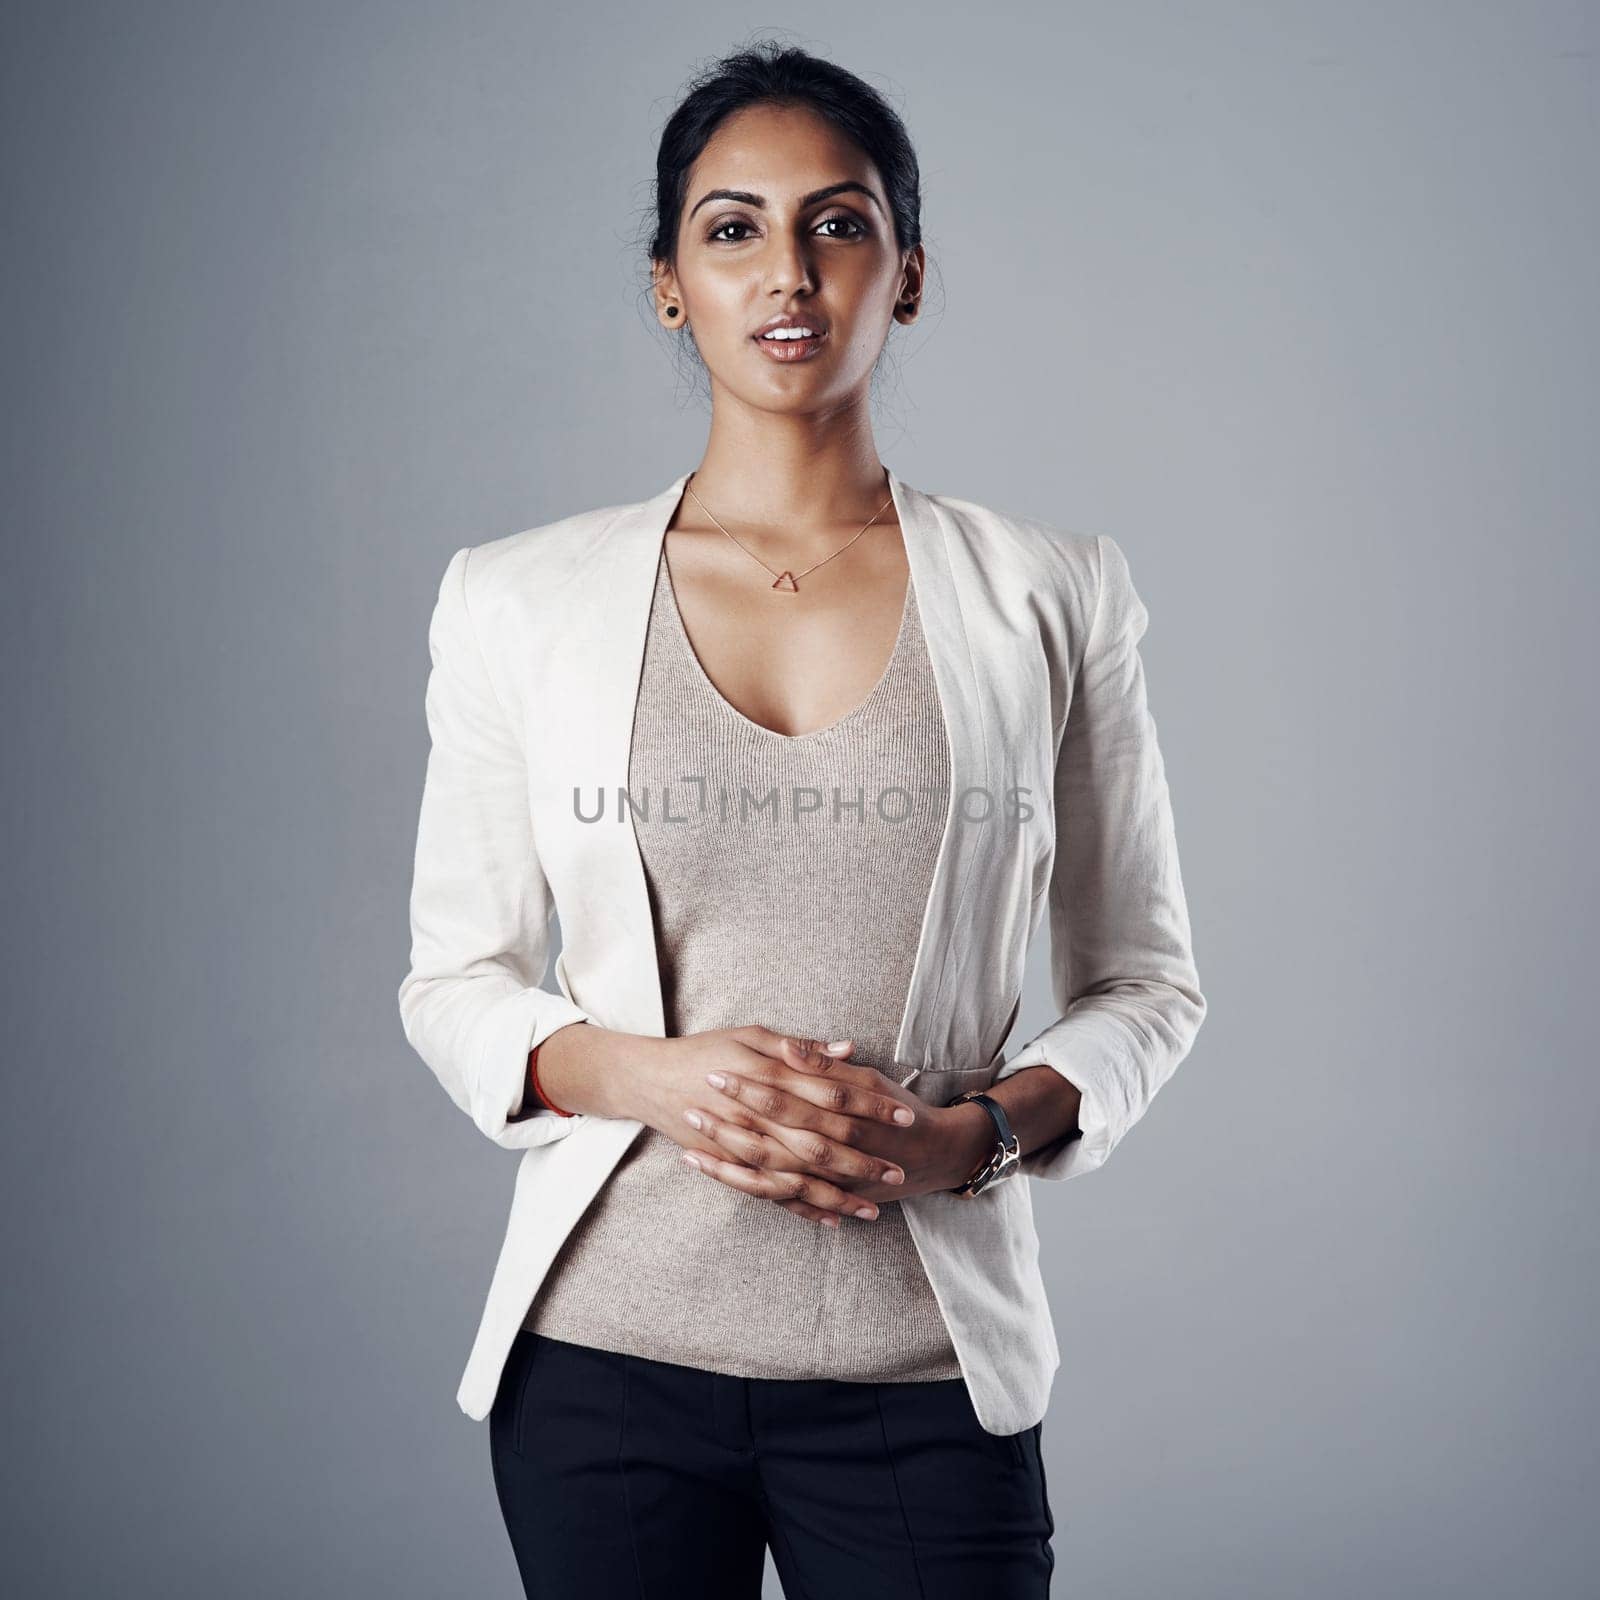 Staying firm in what I stand for. Studio portrait of a young businesswoman posing against a gray background. by YuriArcurs